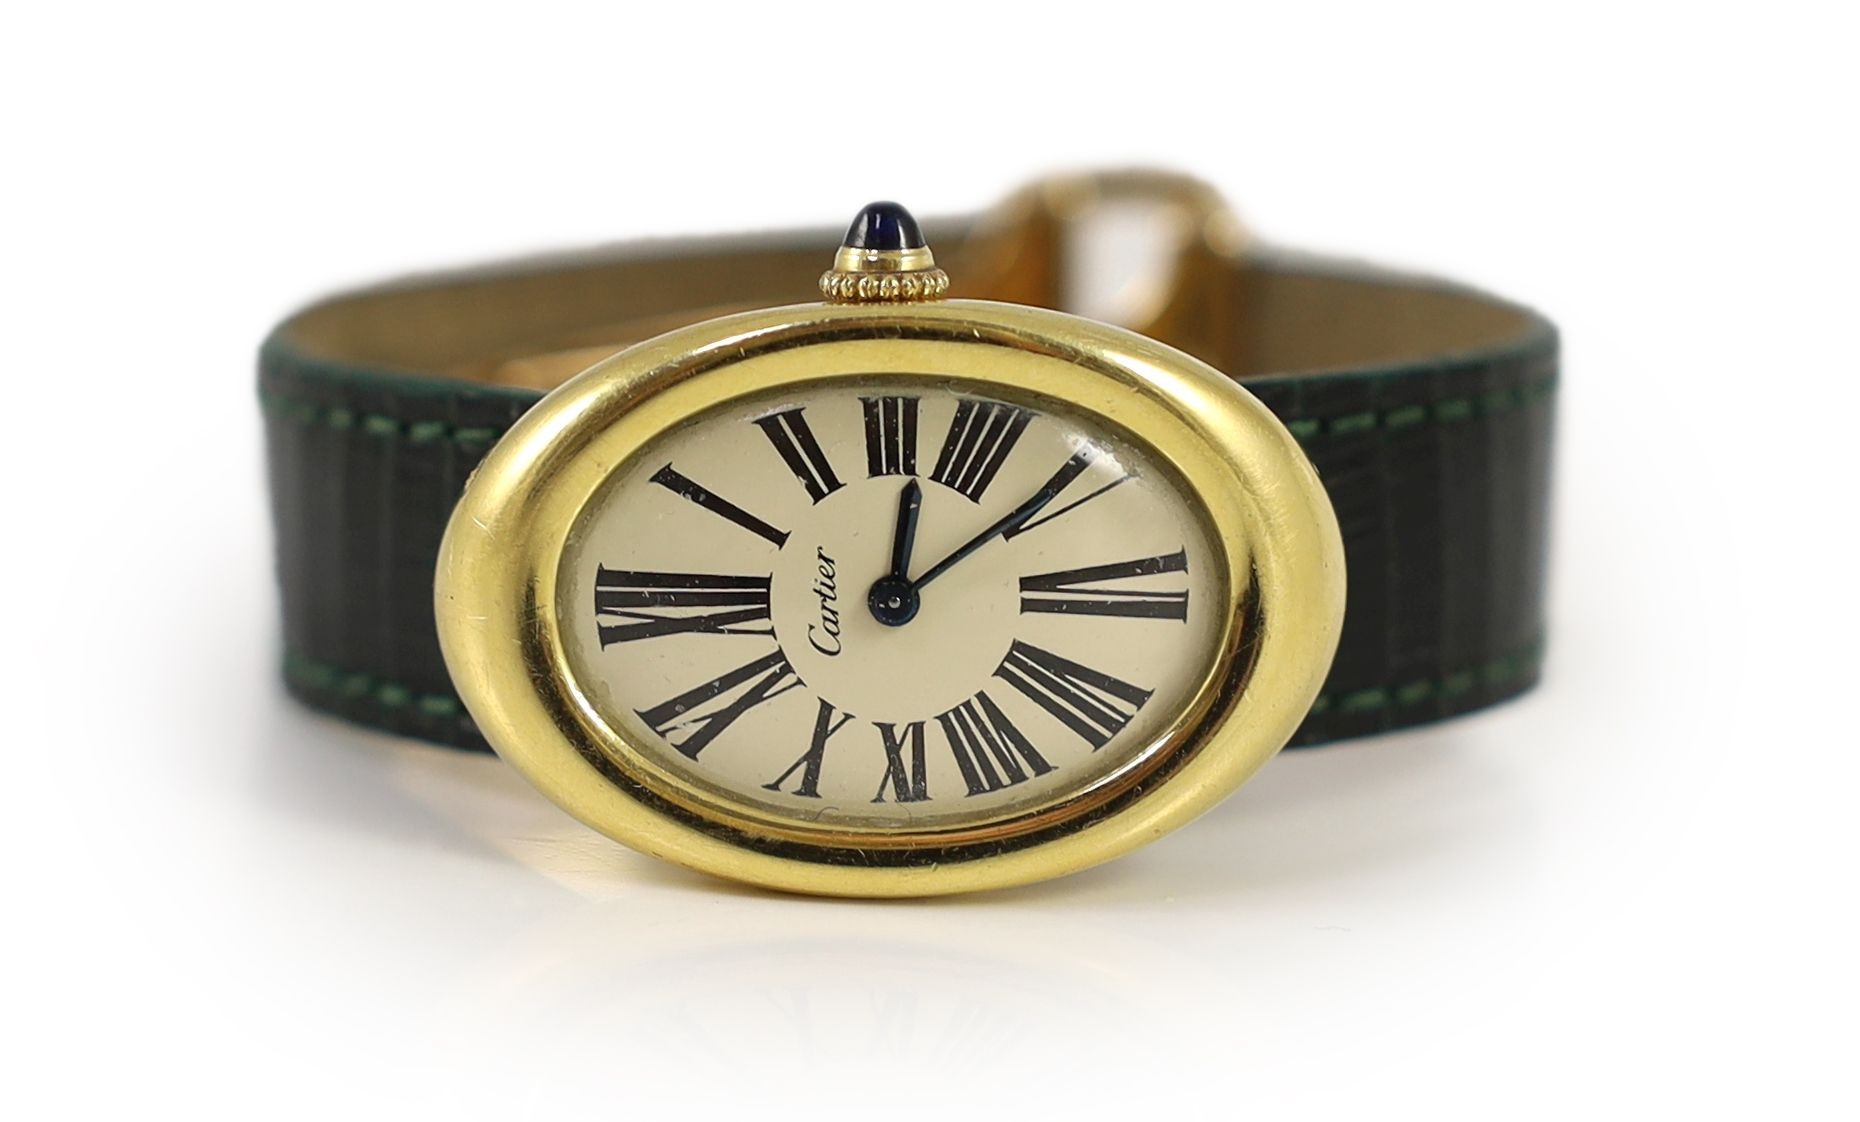 A lady's 18ct gold Cartier Baignoire manual wind oval wrist watch, on a Cartier green leather strap with deployment clasp